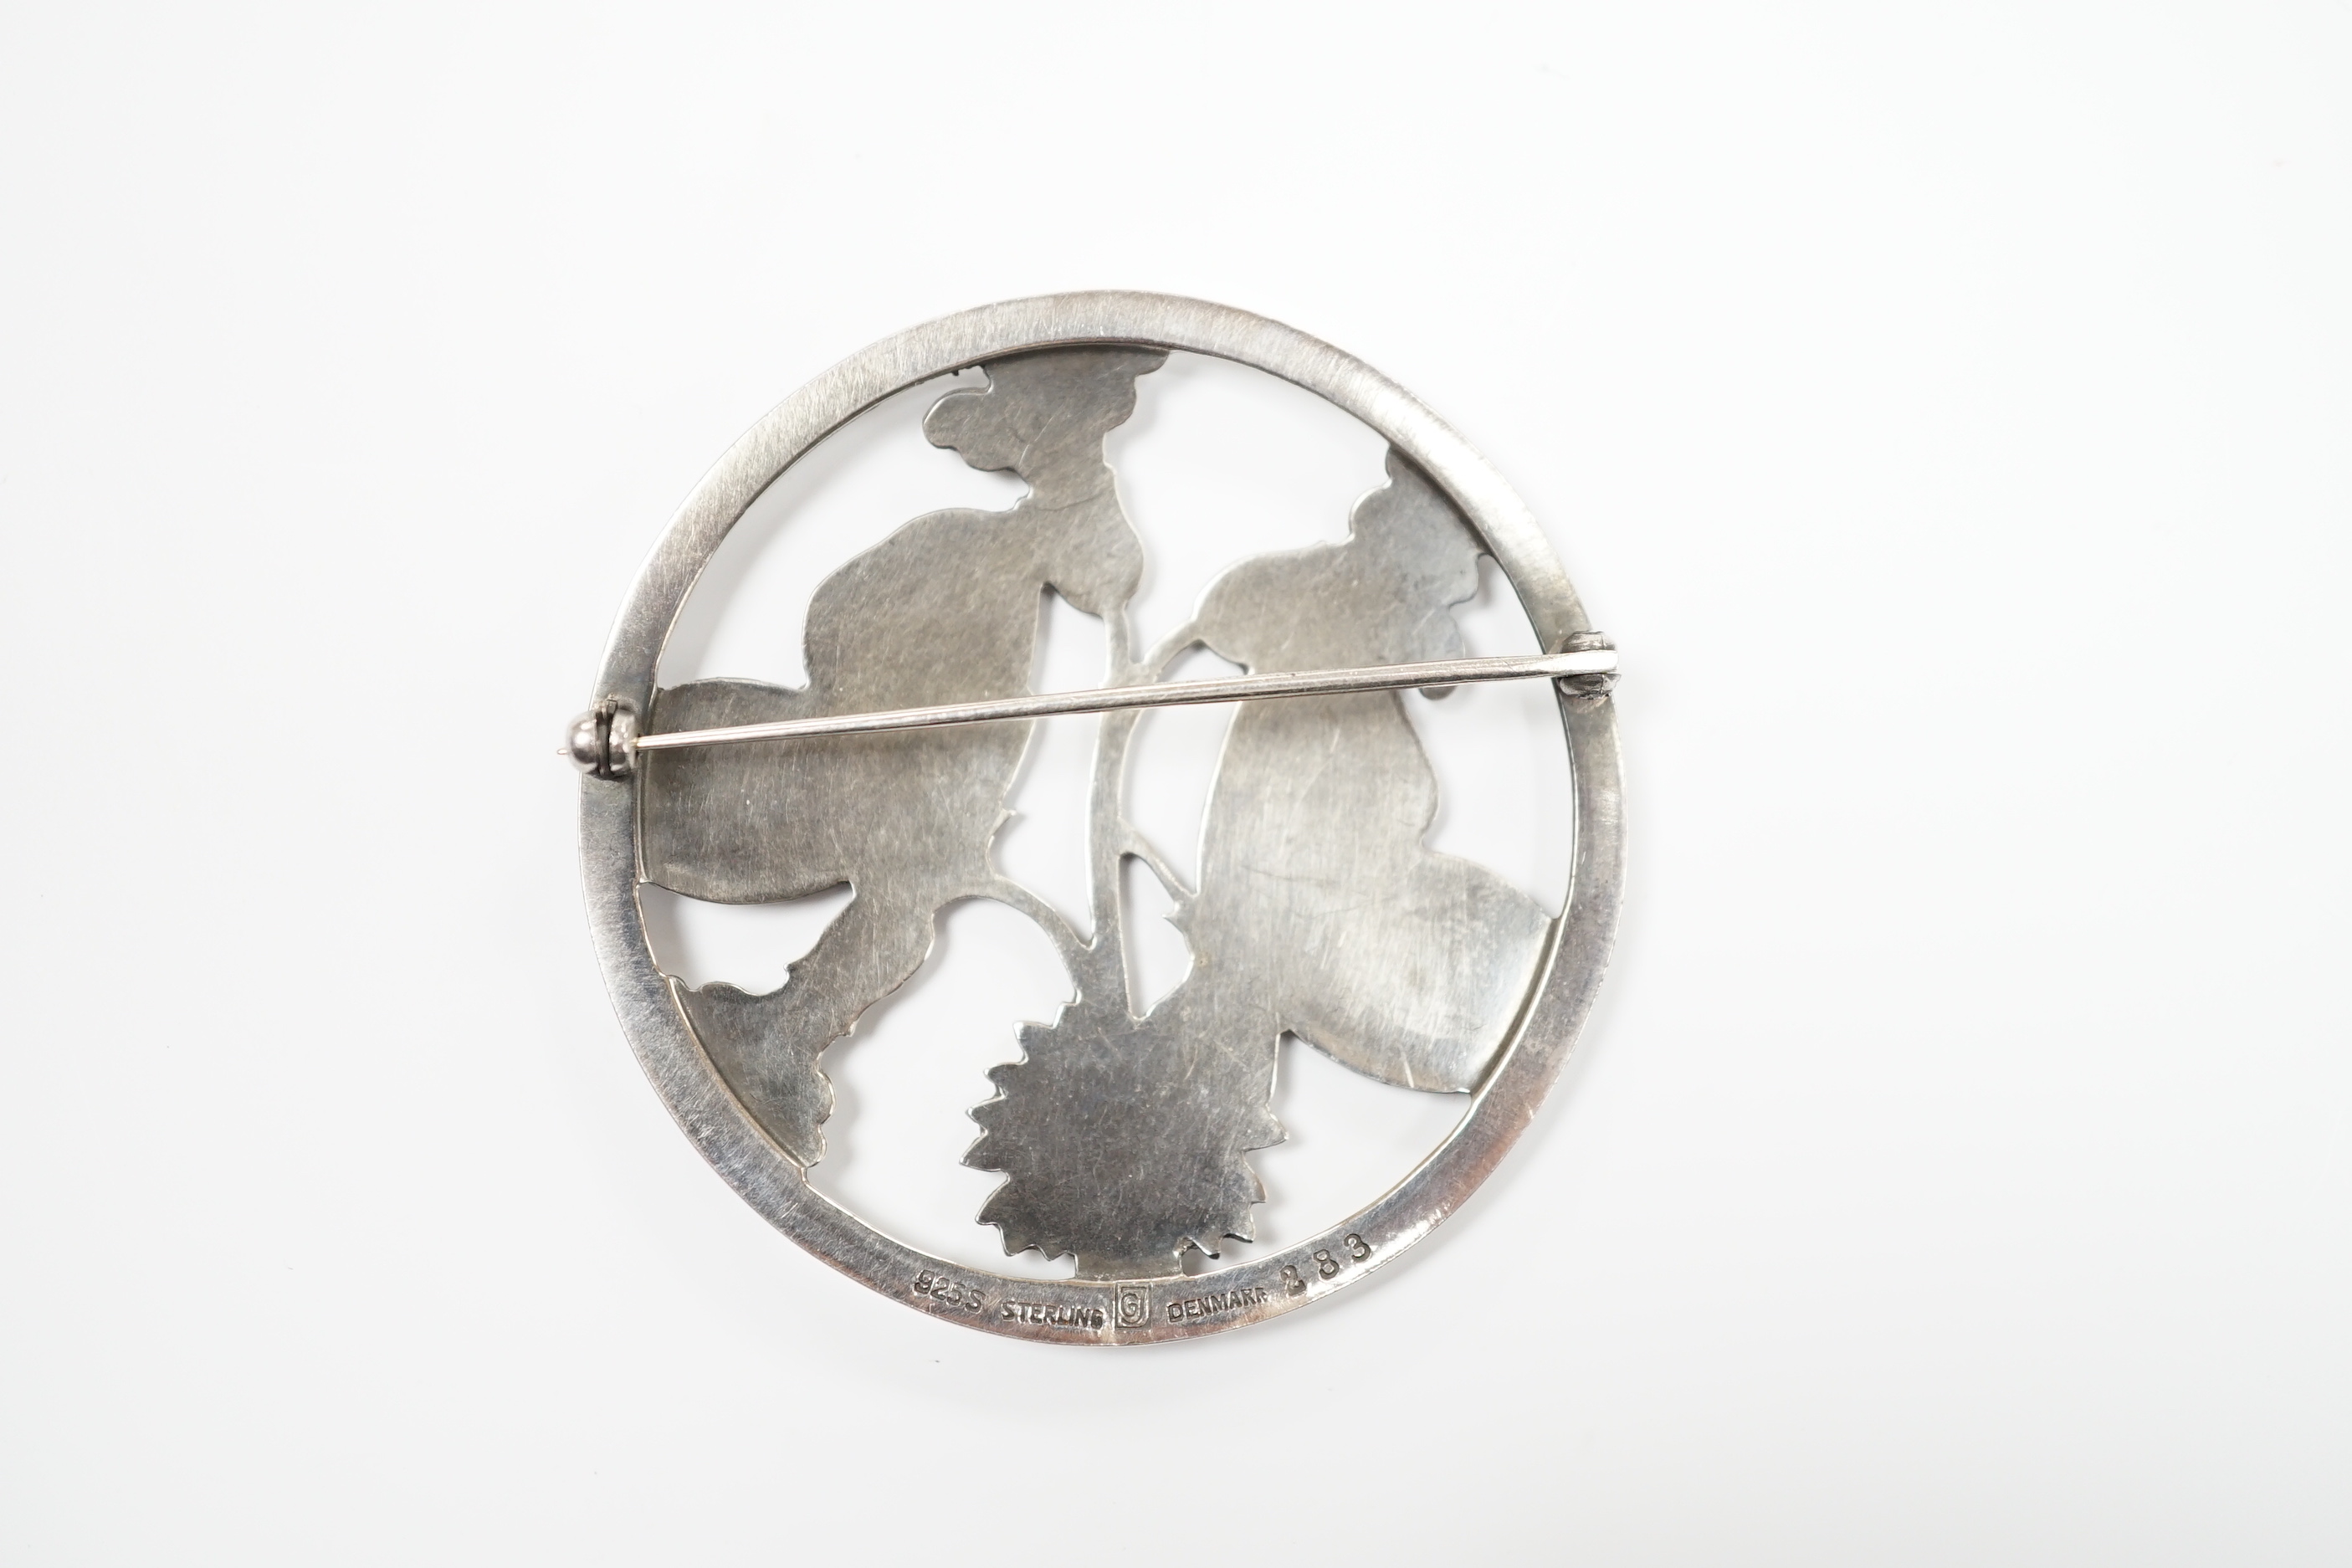 A George Jensen sterling ' butterflies amid foliage' circular brooch, design no. 283, 52mm. - Image 2 of 3